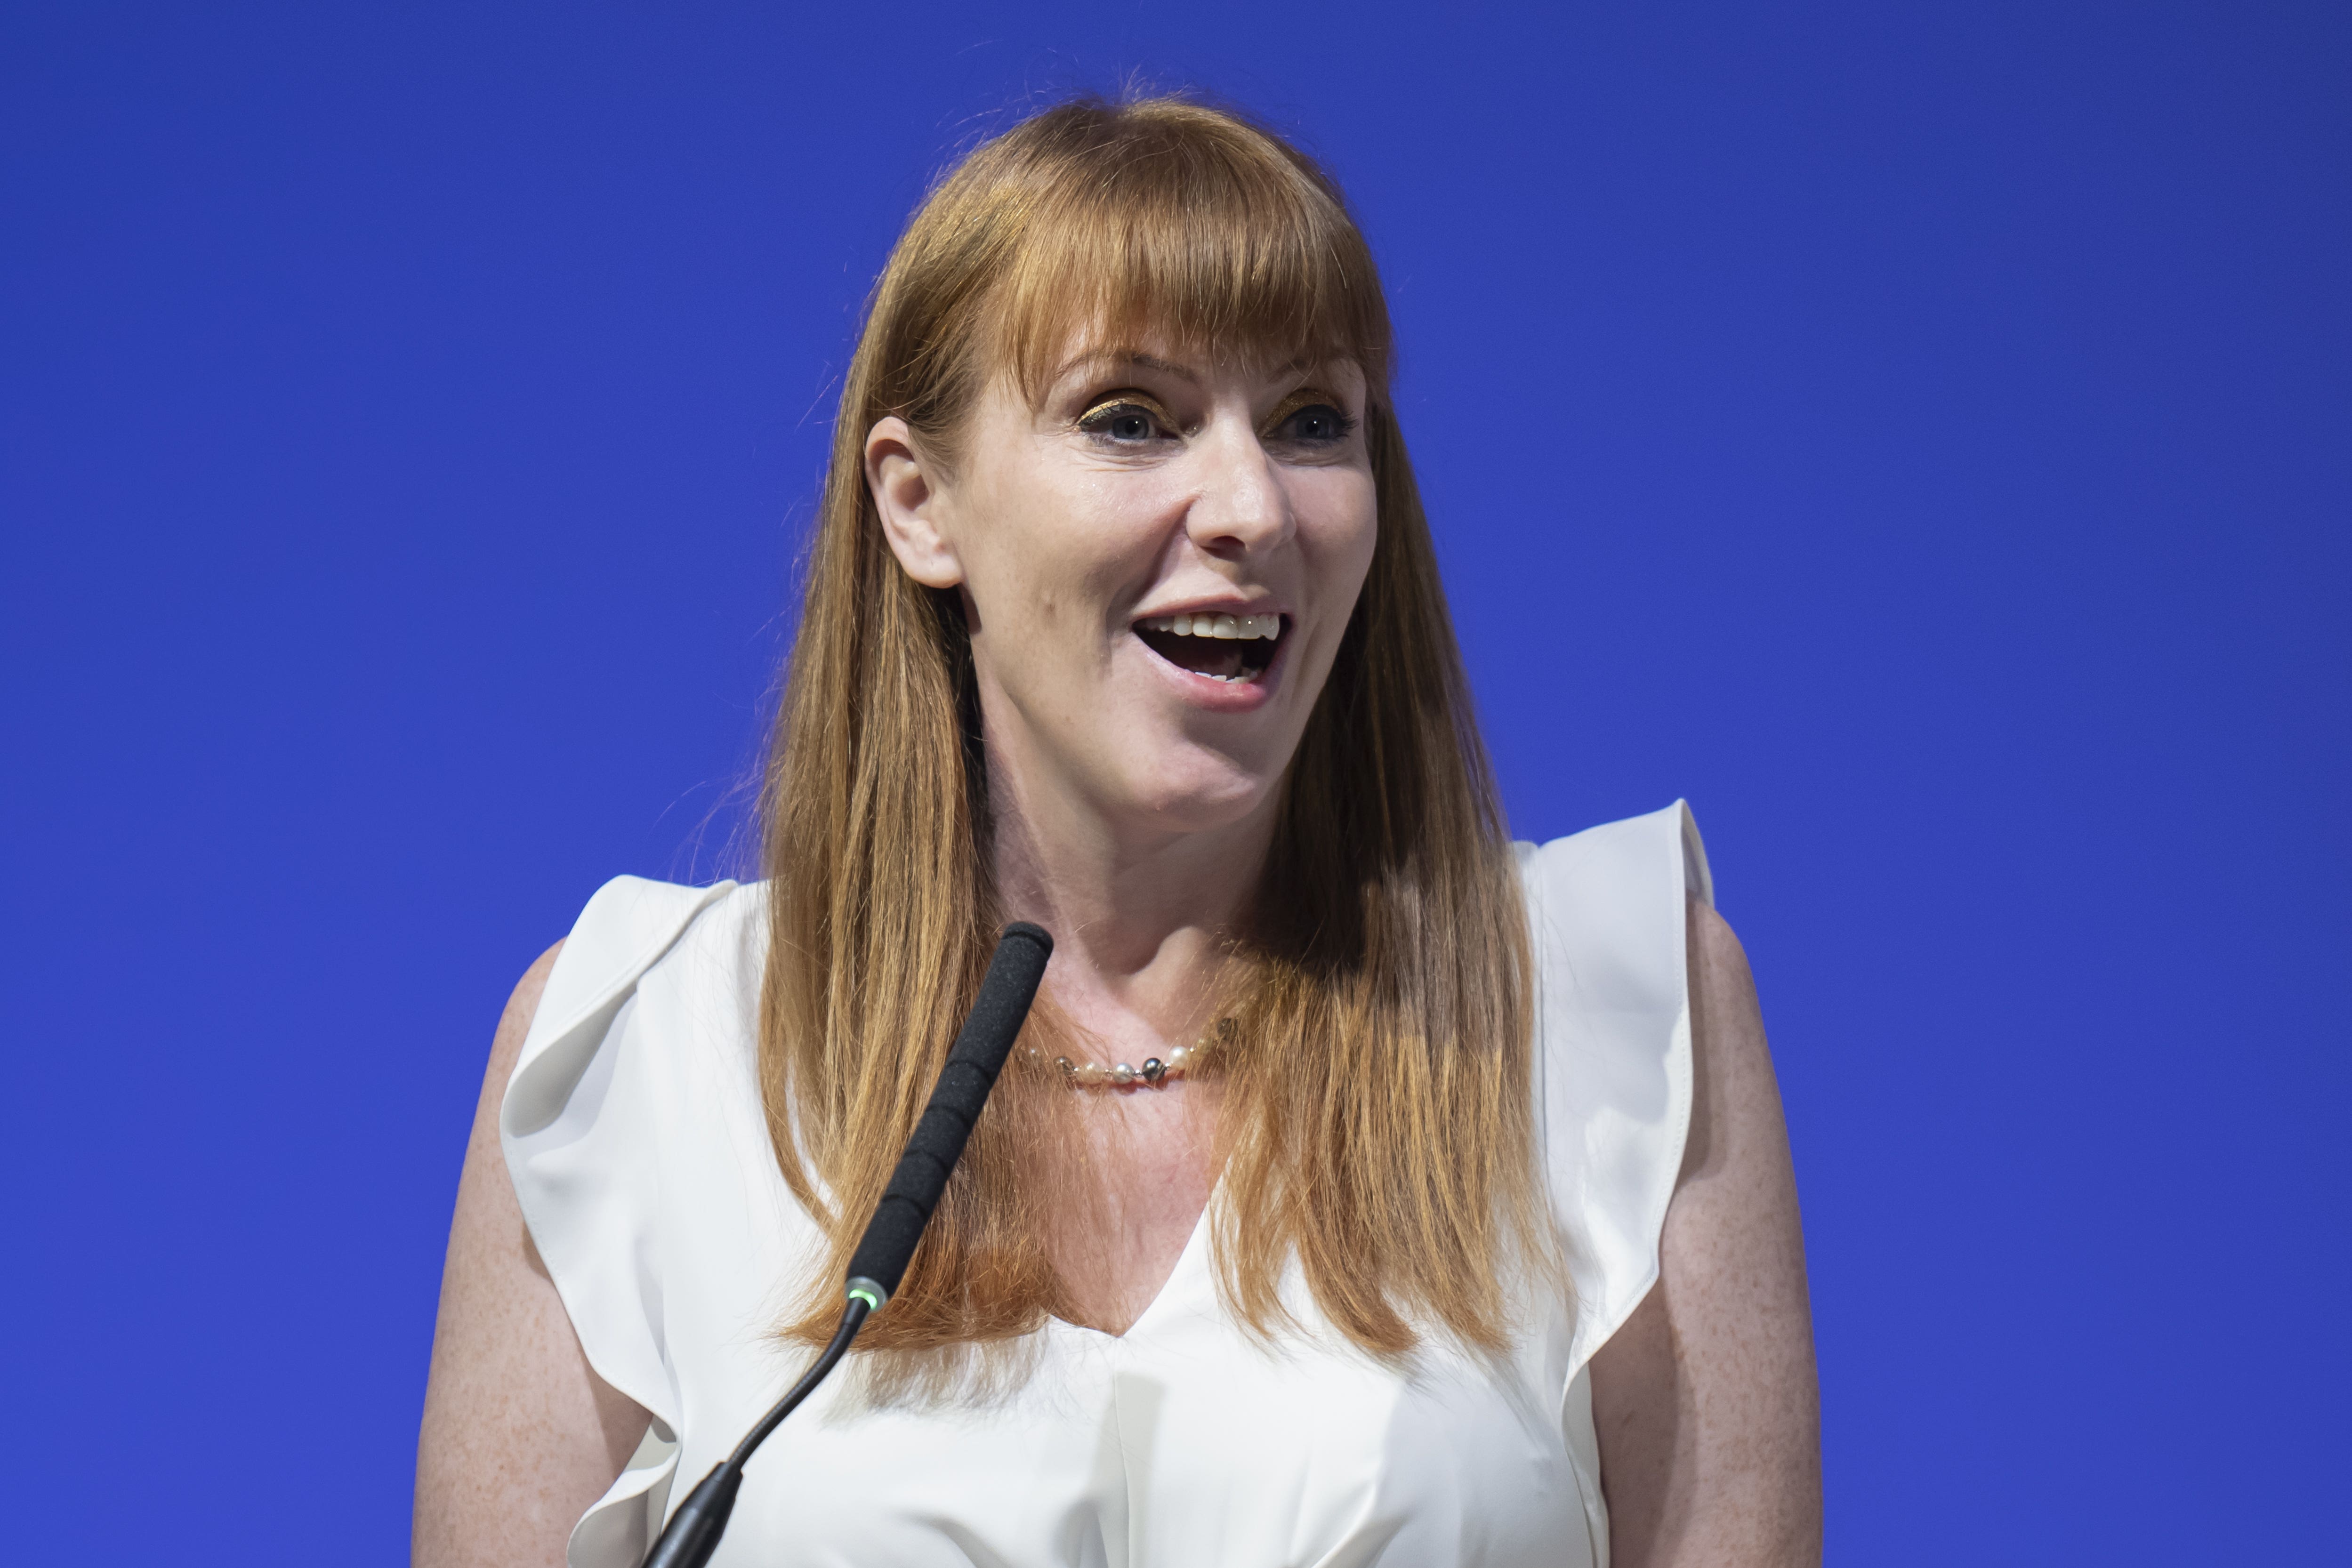 HM Revenue and Customs (HMRC) will reportedly take no further action against Angela Rayner following investigations into her living arrangements a decade ago prompted by Tory allegations